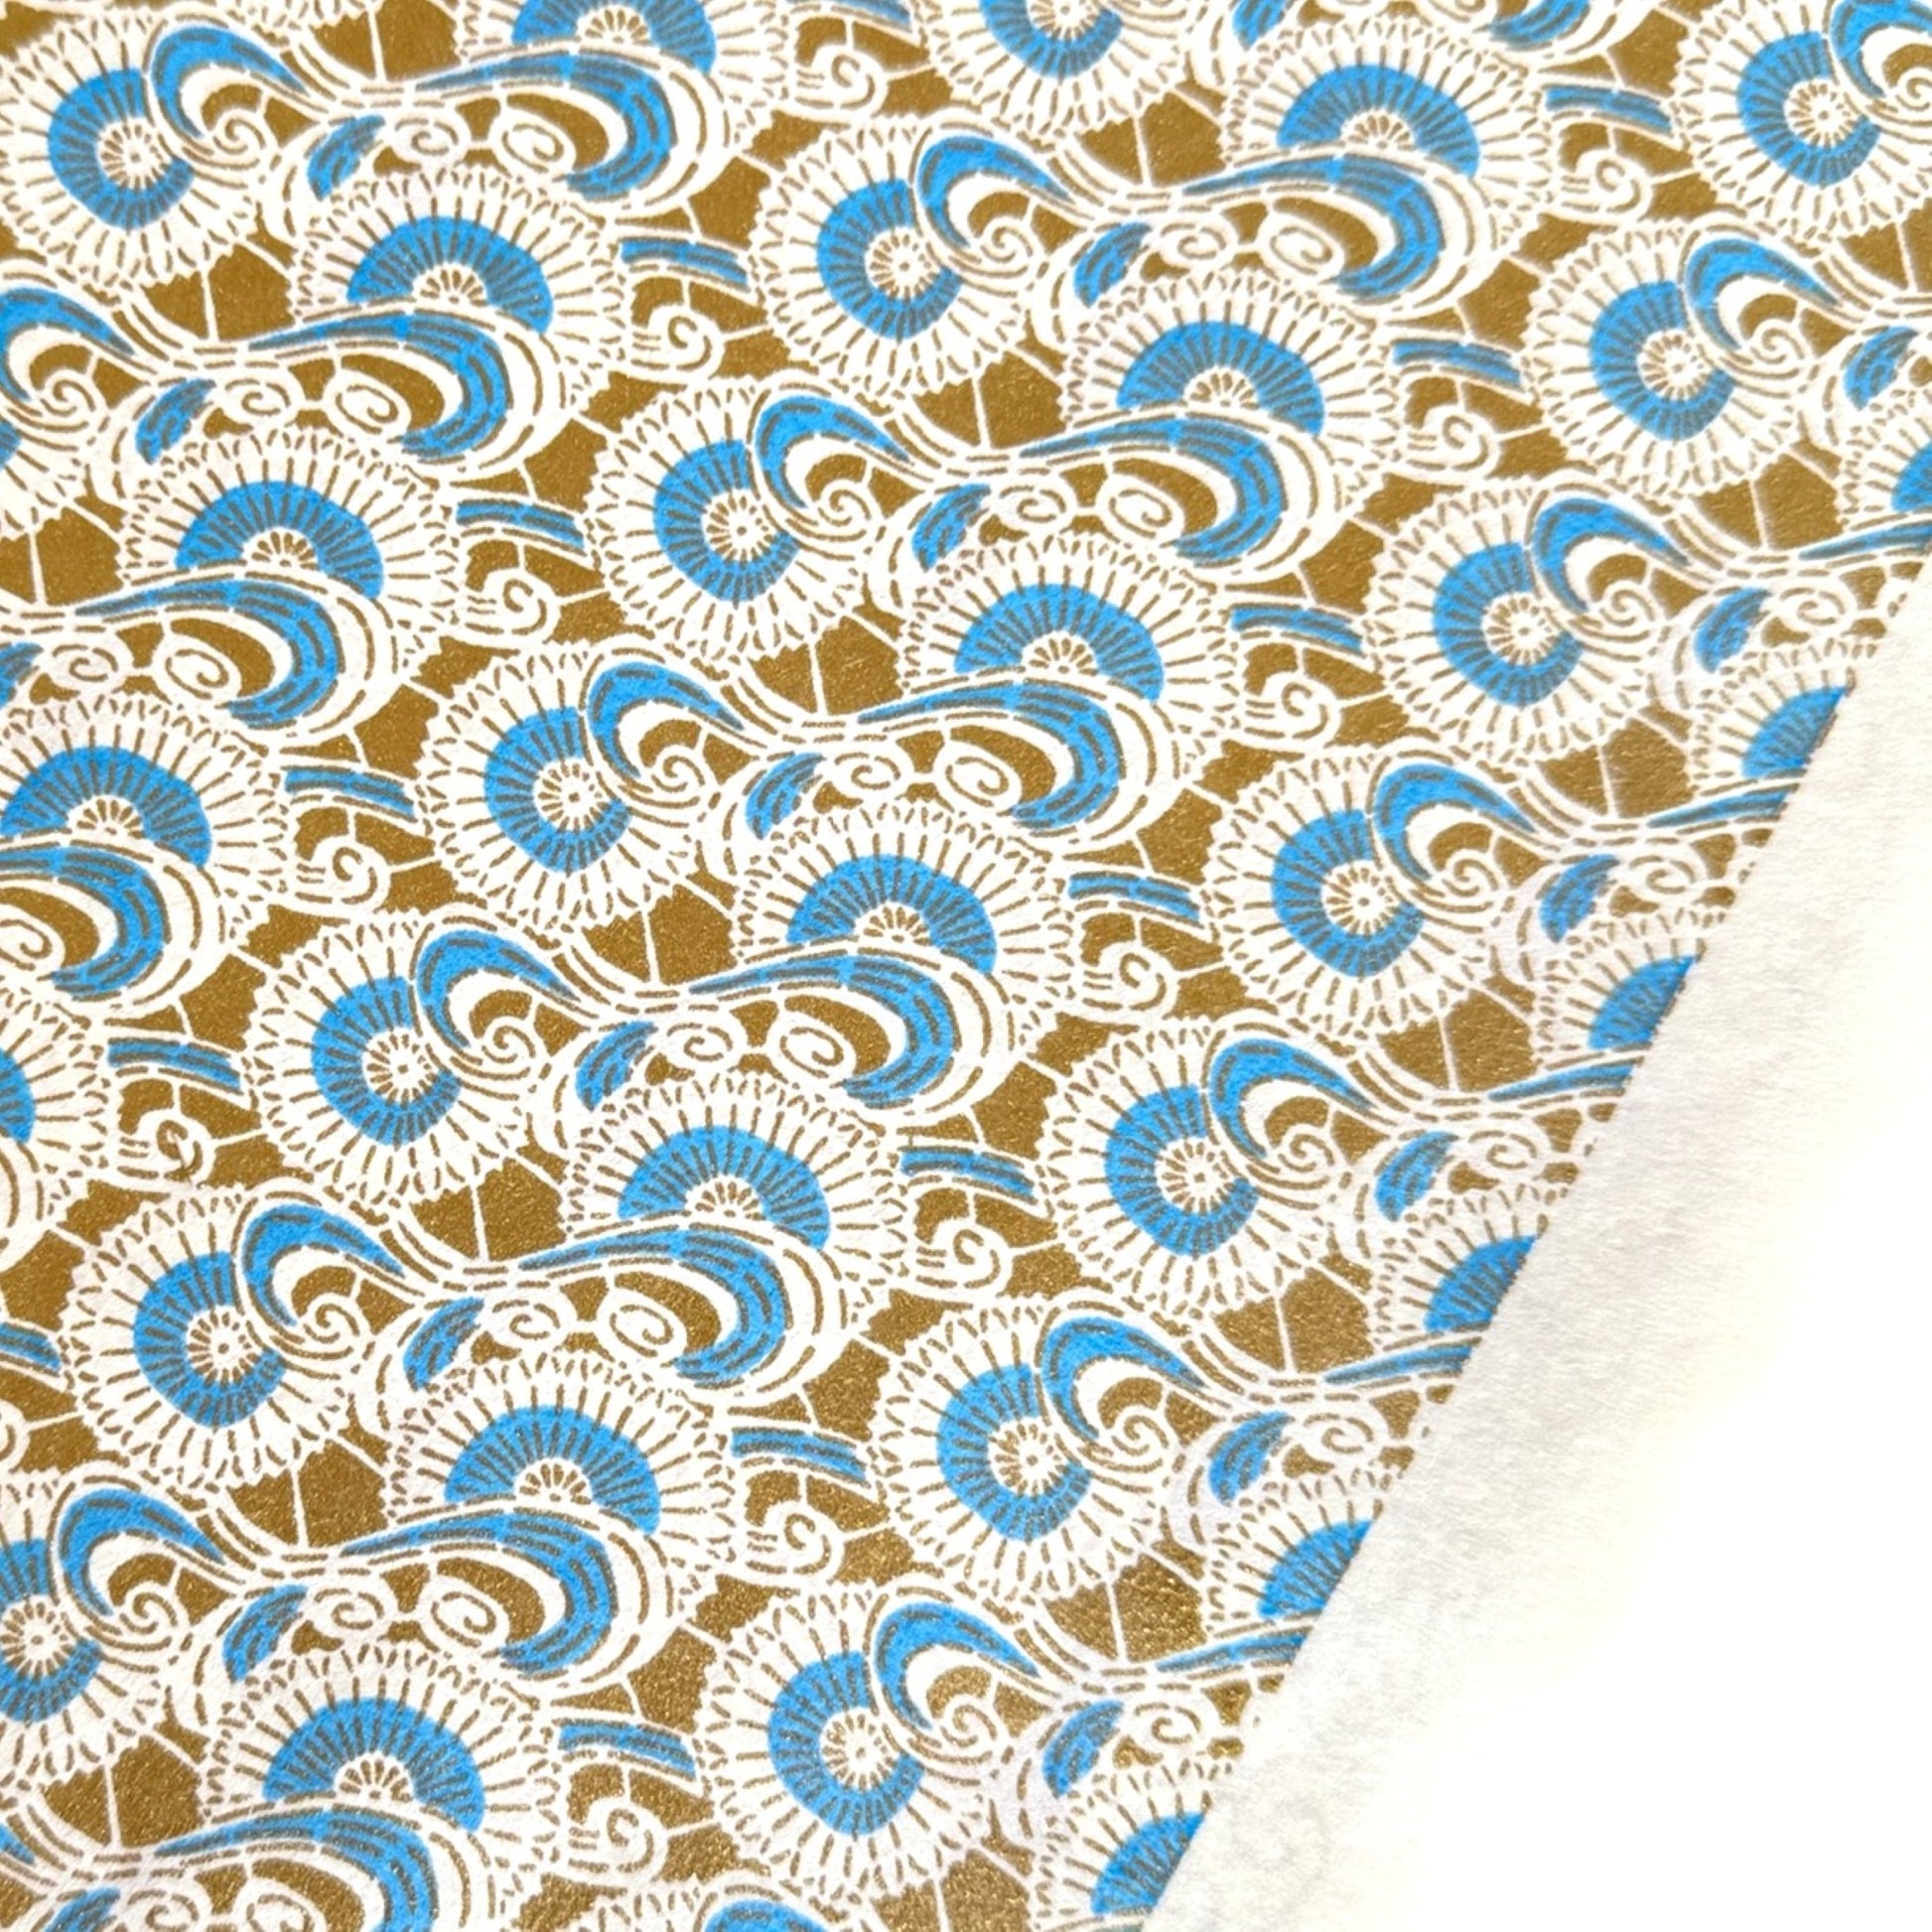 Japanese silkscreen chiyogami paper with a repeat floral pattern in gold an cerulean blue